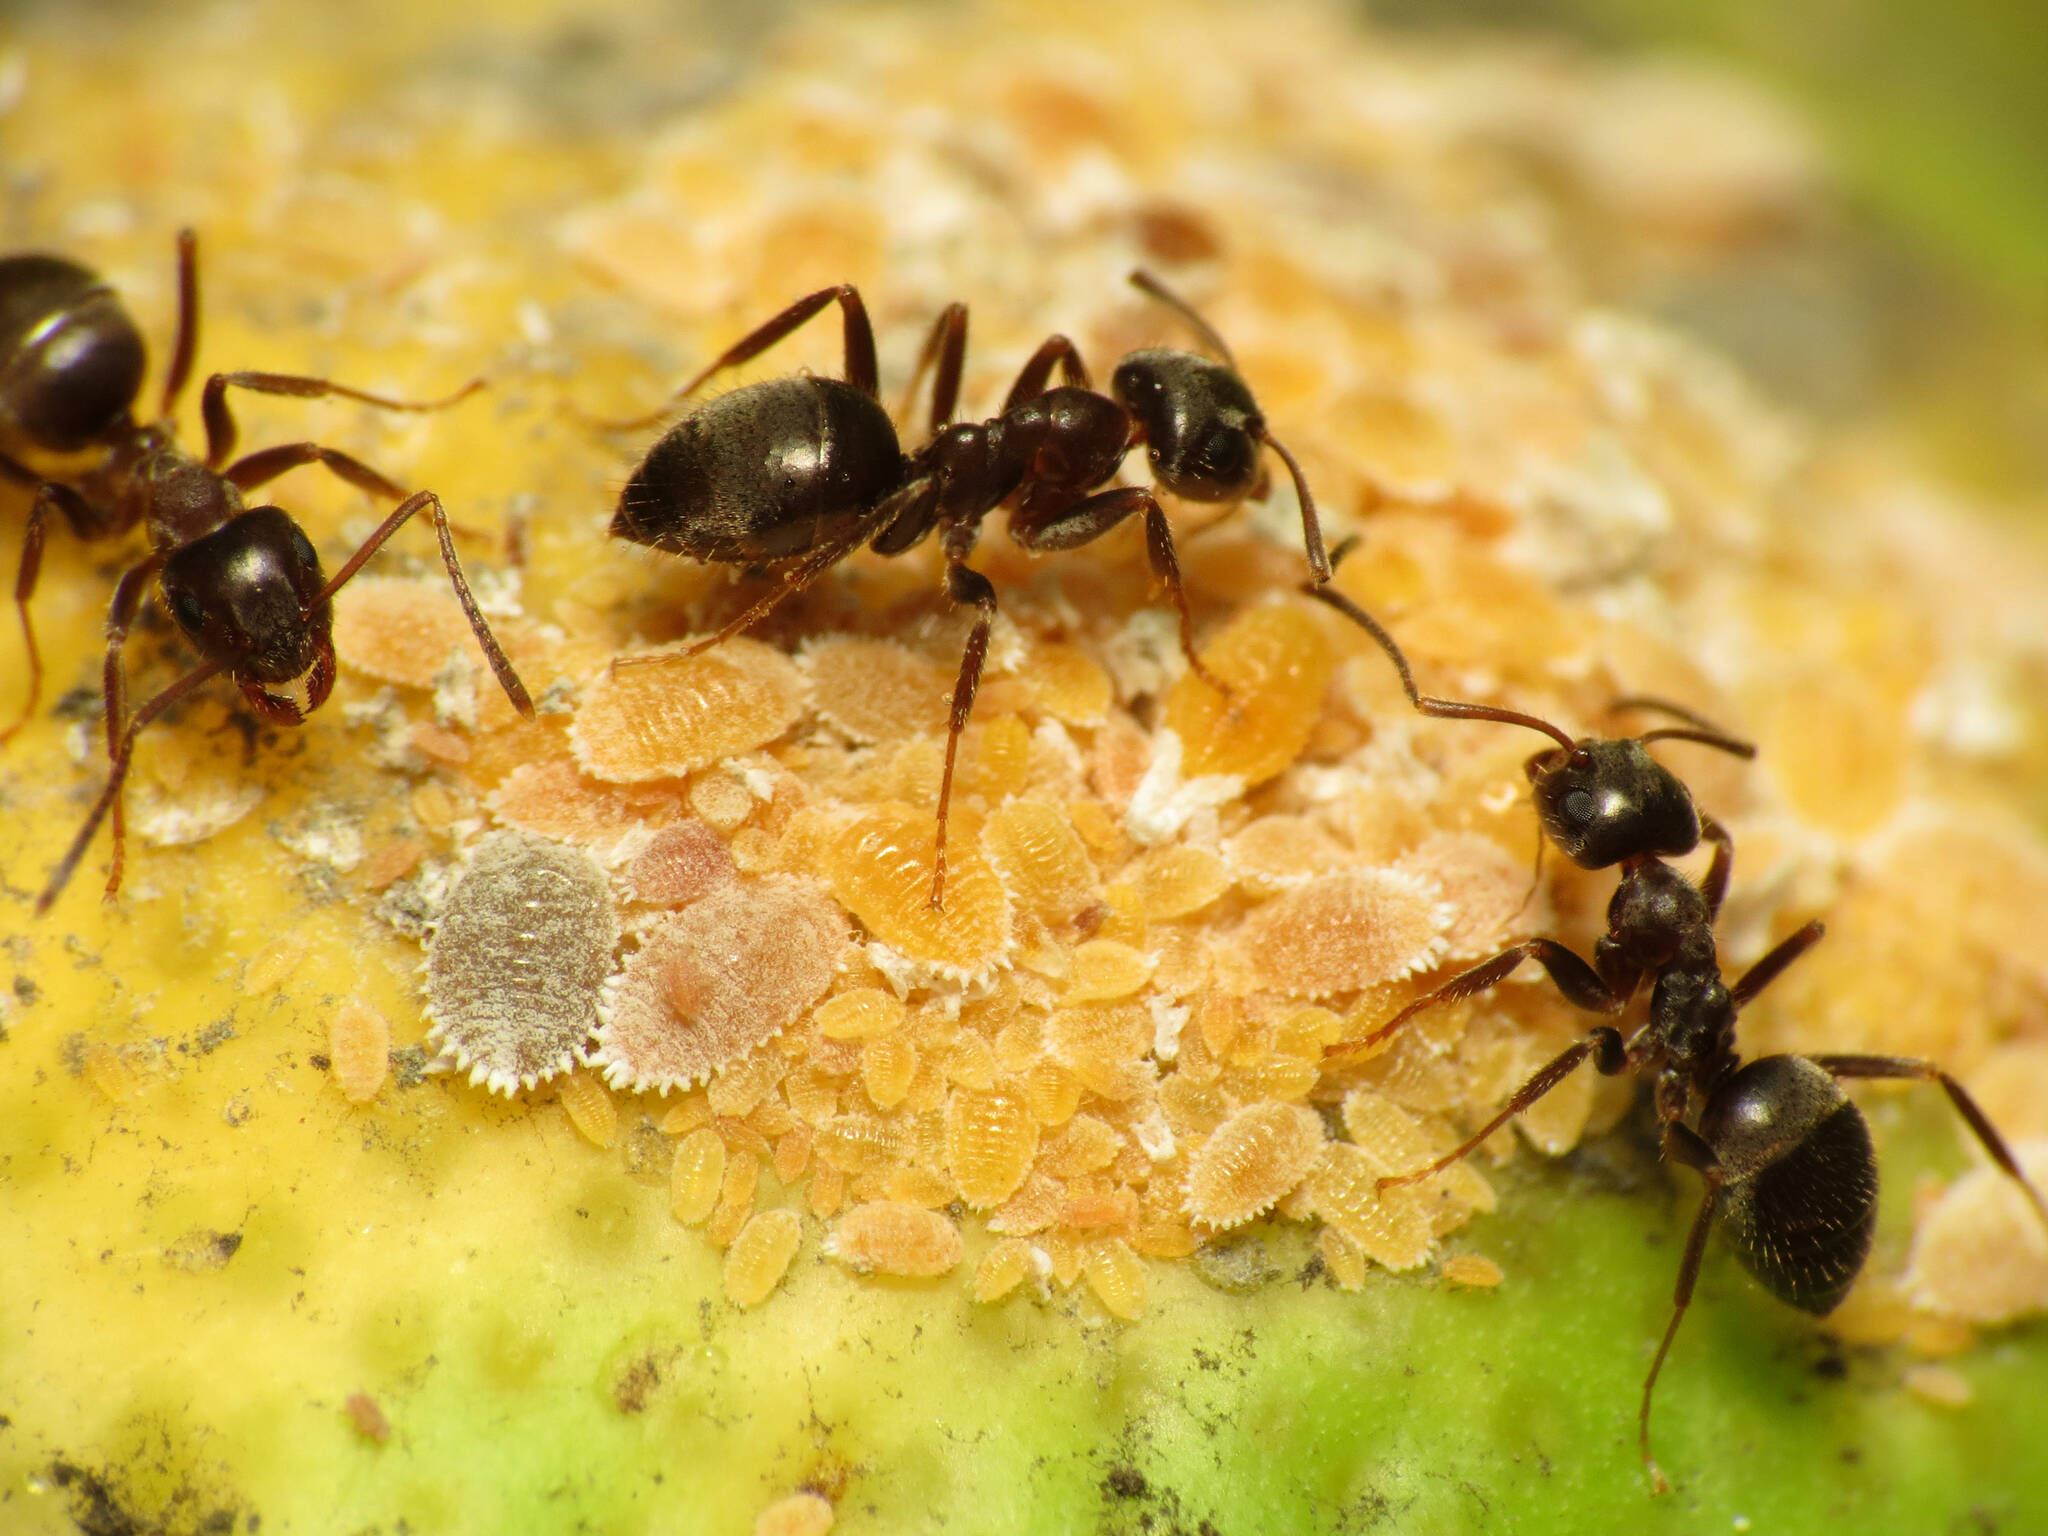 This photo shows black garden ants tending citrus mealybug. When injured, colonial animals such as ants and bees, may emit a type of alarm signal that also calls in reinforcements, to help repel possible danger.(Courtesy Photo / Katja Schulz from Washington, D. C)